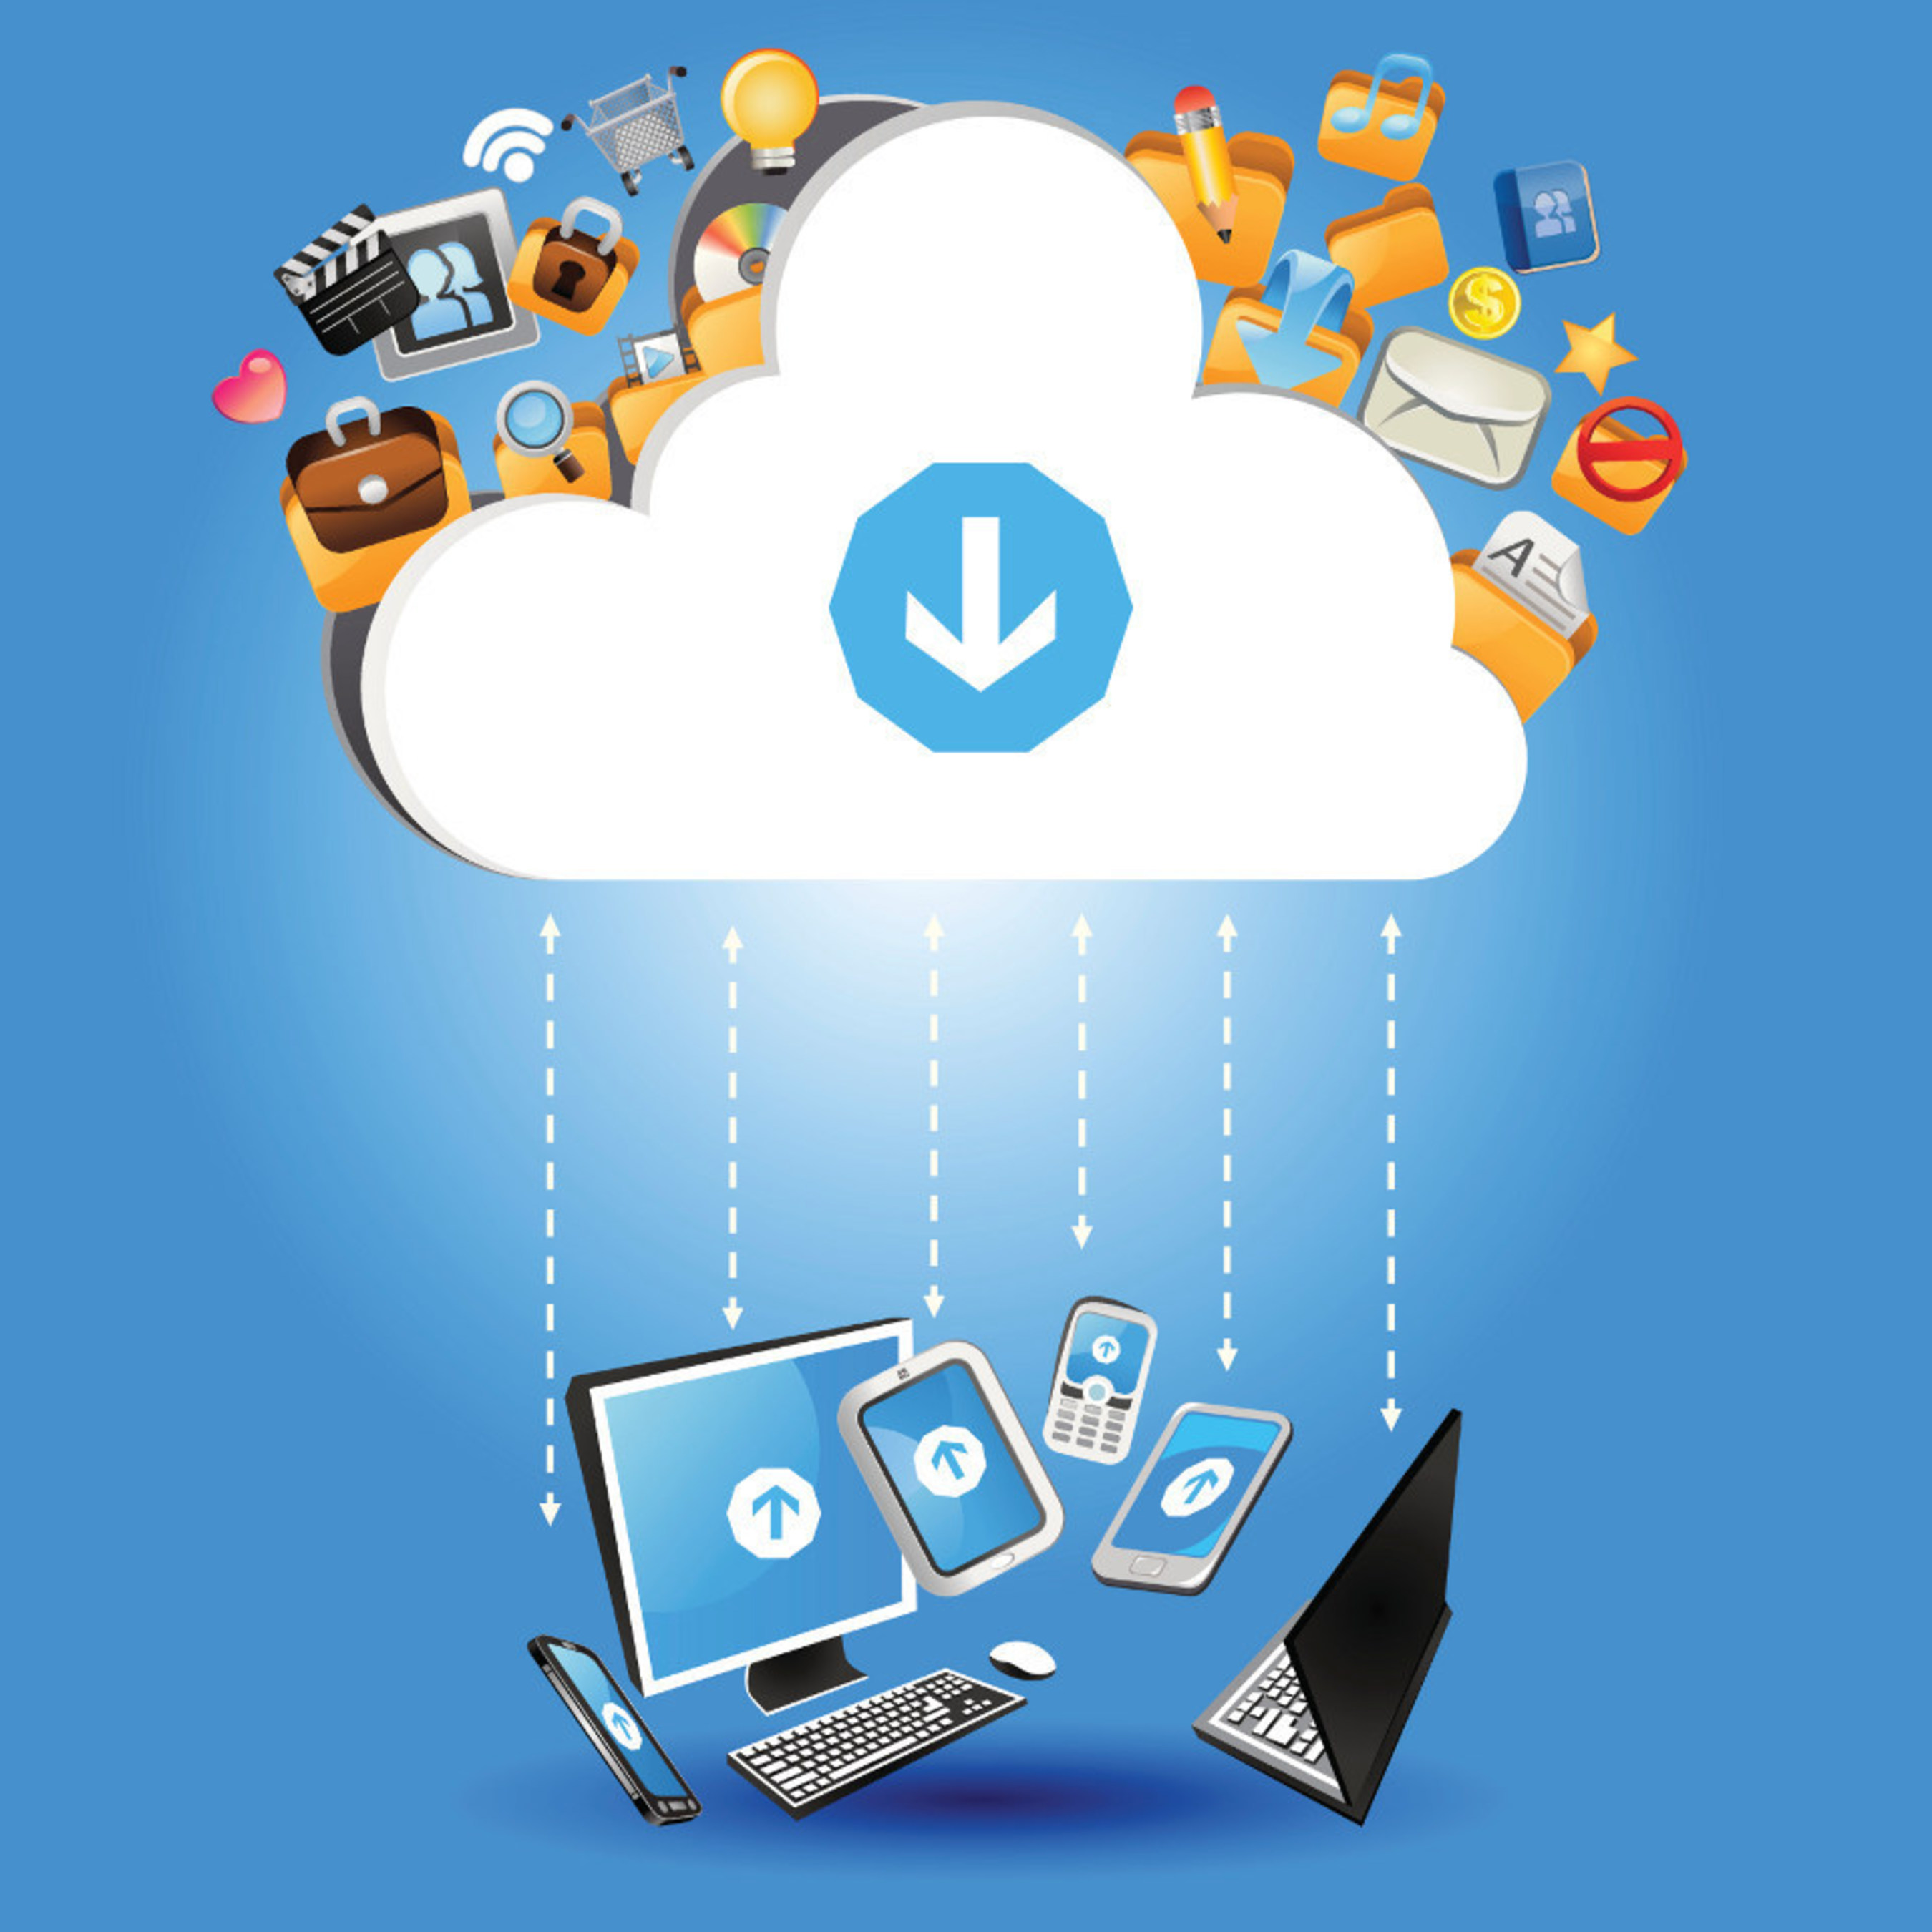 As businesses migrate to the cloud, monitoring and management solutions become must become more dynamic and adaptable.